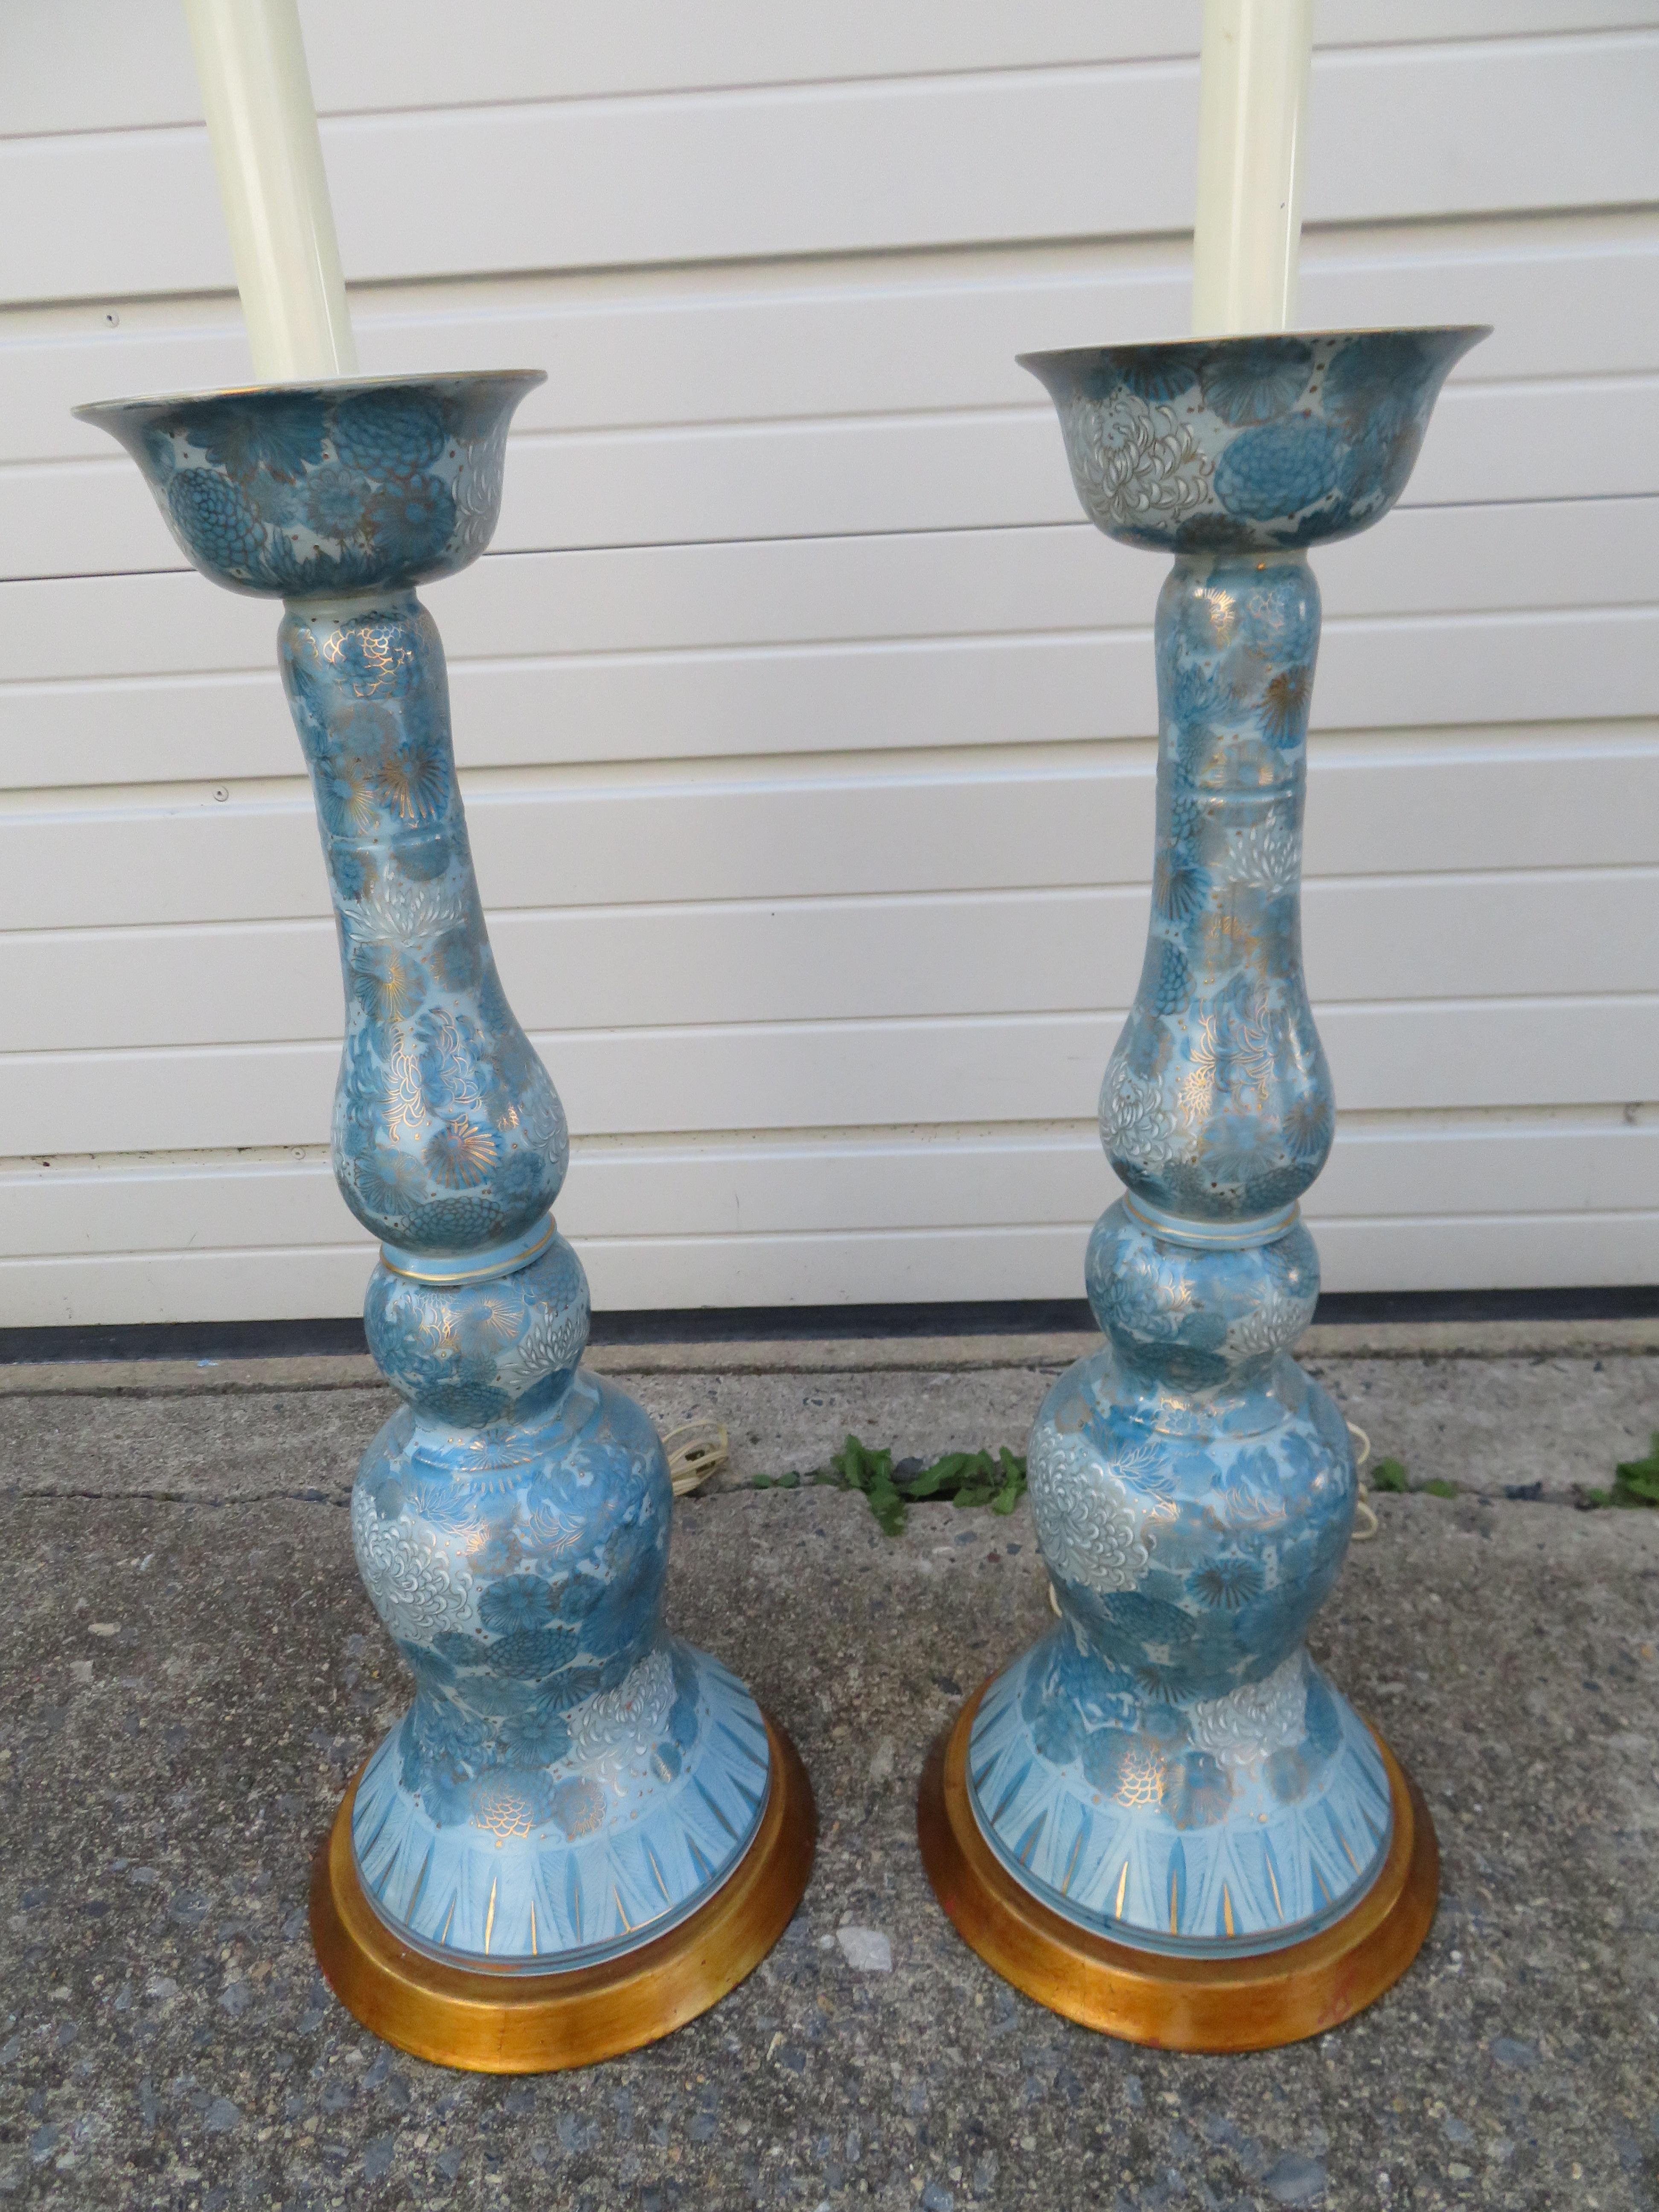 Spectacular large pair of blue and white chrysanthemum porcelain lamps by Marbro. These lamps are show stoppers in person-large-scale and impressive!